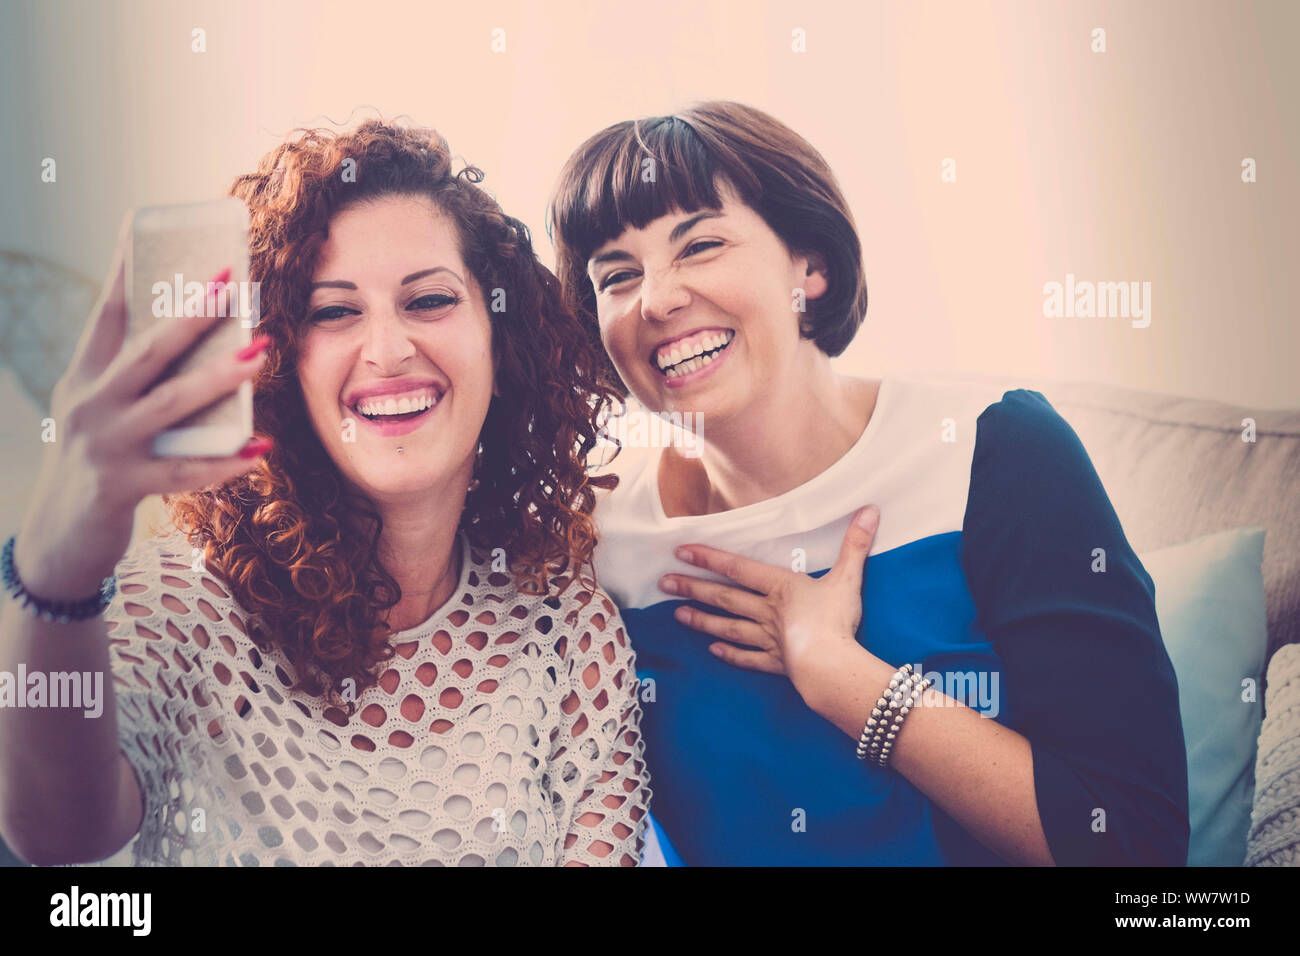 call friends with mobile phone in live video for a couple of beautiful middle age women at home. communicate and modern connected people concept. Stock Photo